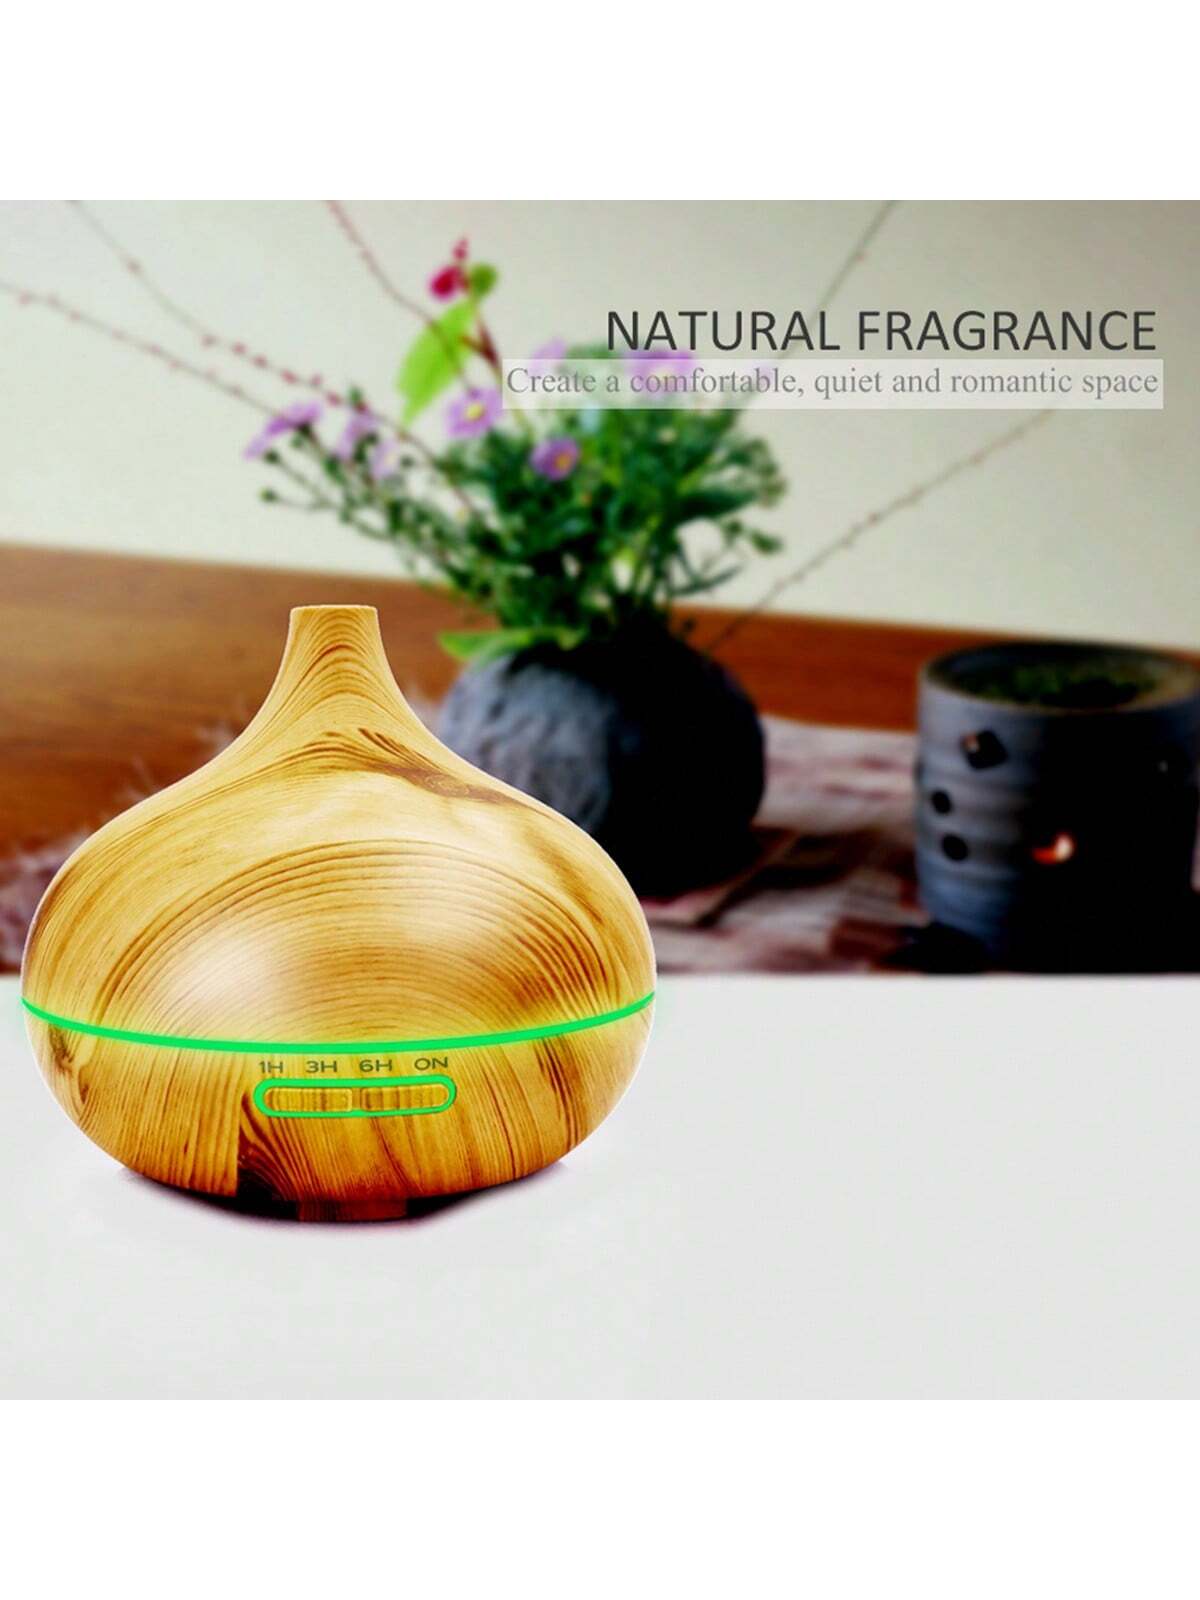 1pc Humidifier300ml Premium, Essential Oil Diffuser with Remote Control, 5 in 1 Ultrasonic Aromatherapy Fragrant Oil Humidifier Vaporizer, Timer and Auto-Off Safety Switch-wood color-6